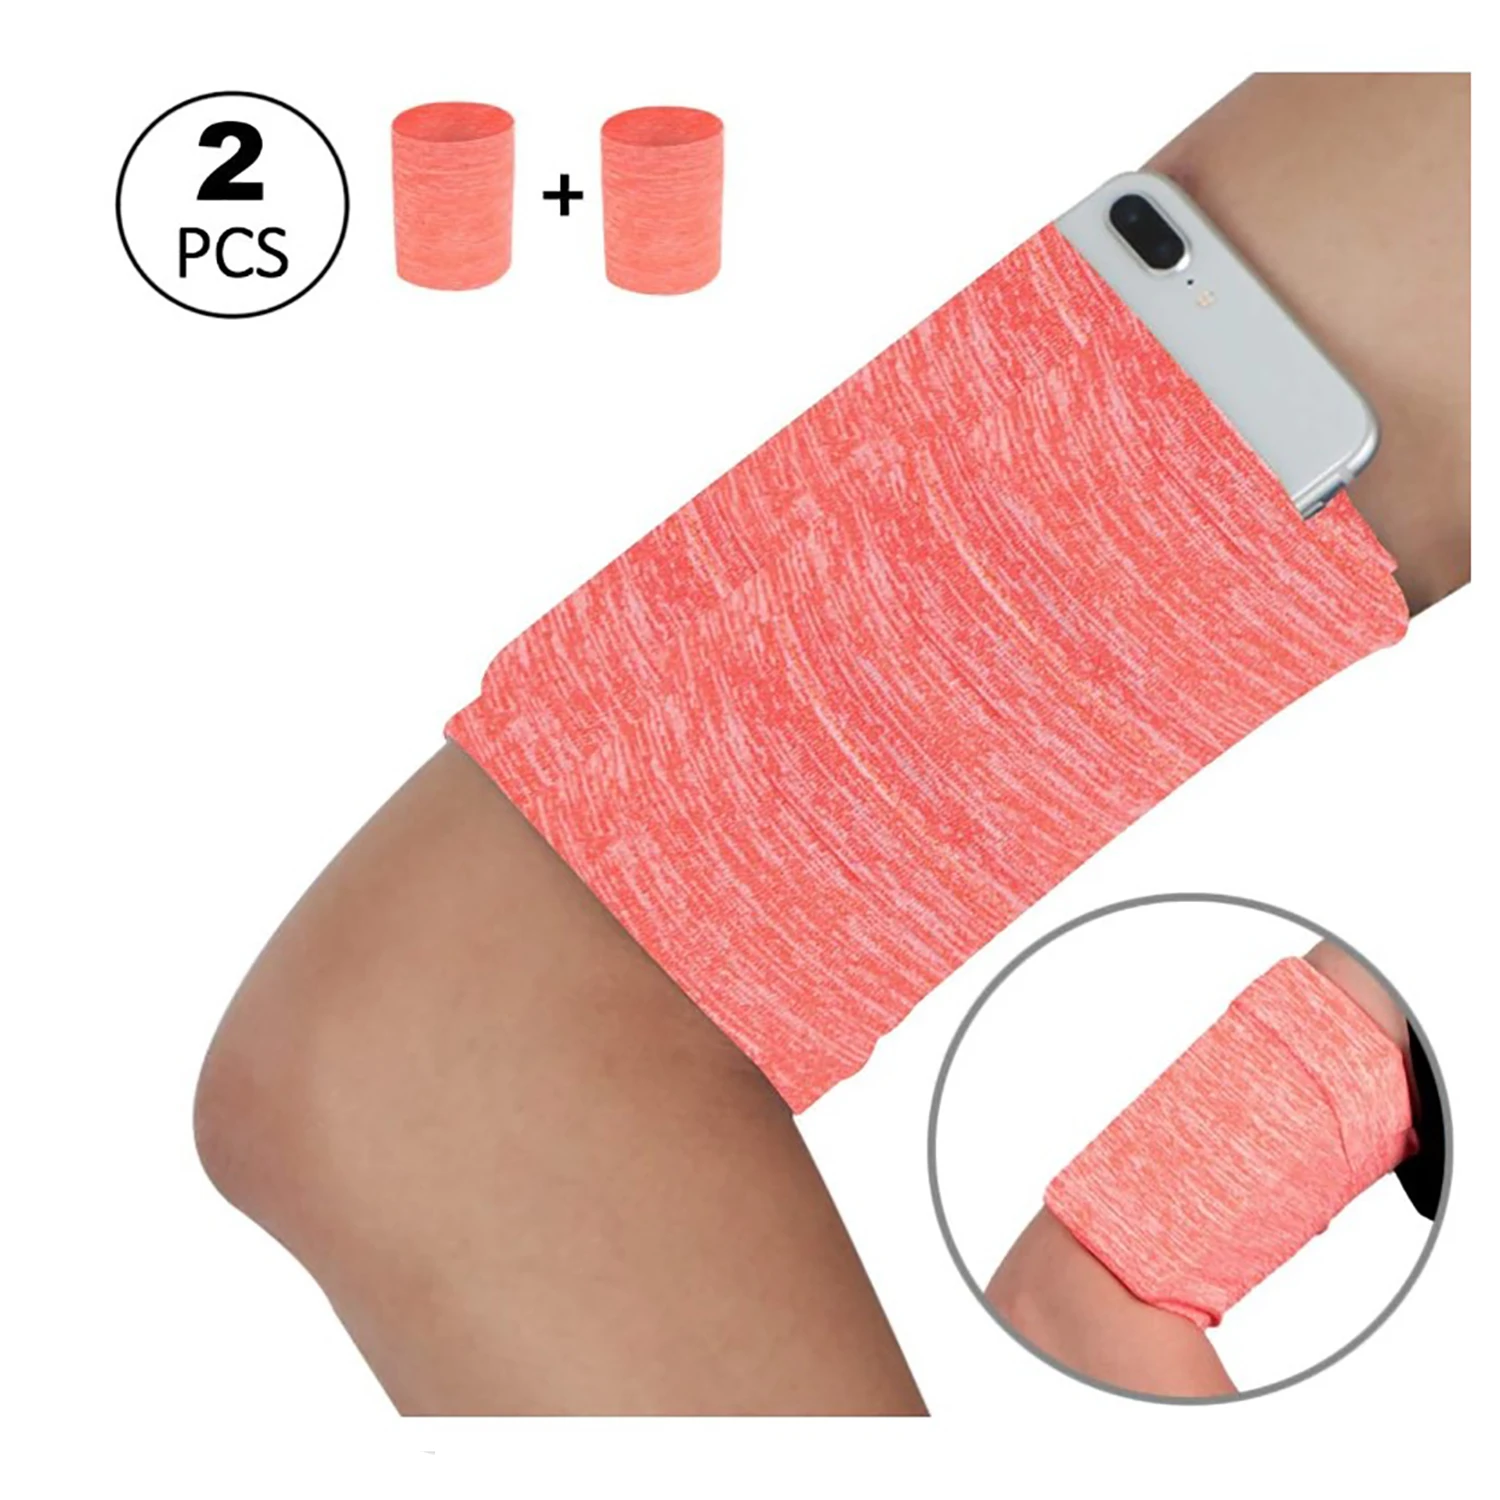 Armband Wristband for Smartphone Running - Phone Wrist Band Sleeve Arm Bag Running Sports Arm Strap Wristband Holder Pouch